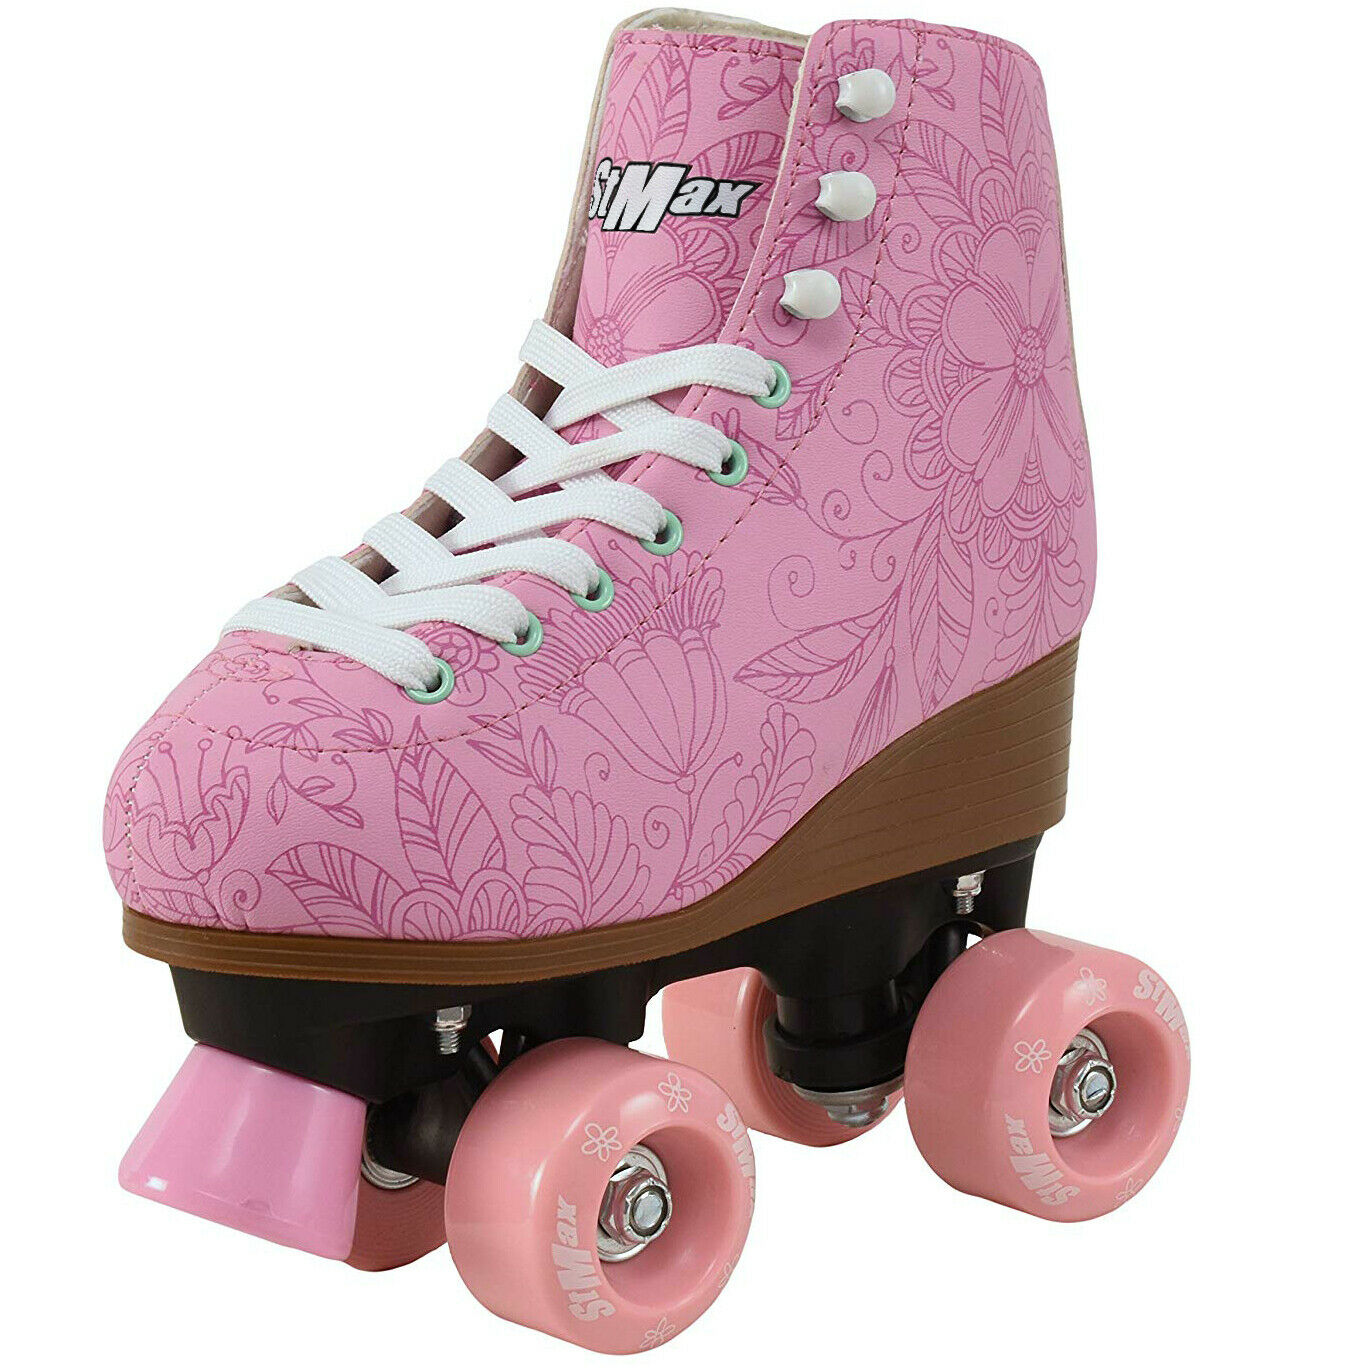 Quad Roller Skates for Girls and Women Size 2.5 Kids to 8.5 Women Outdoor Indoor